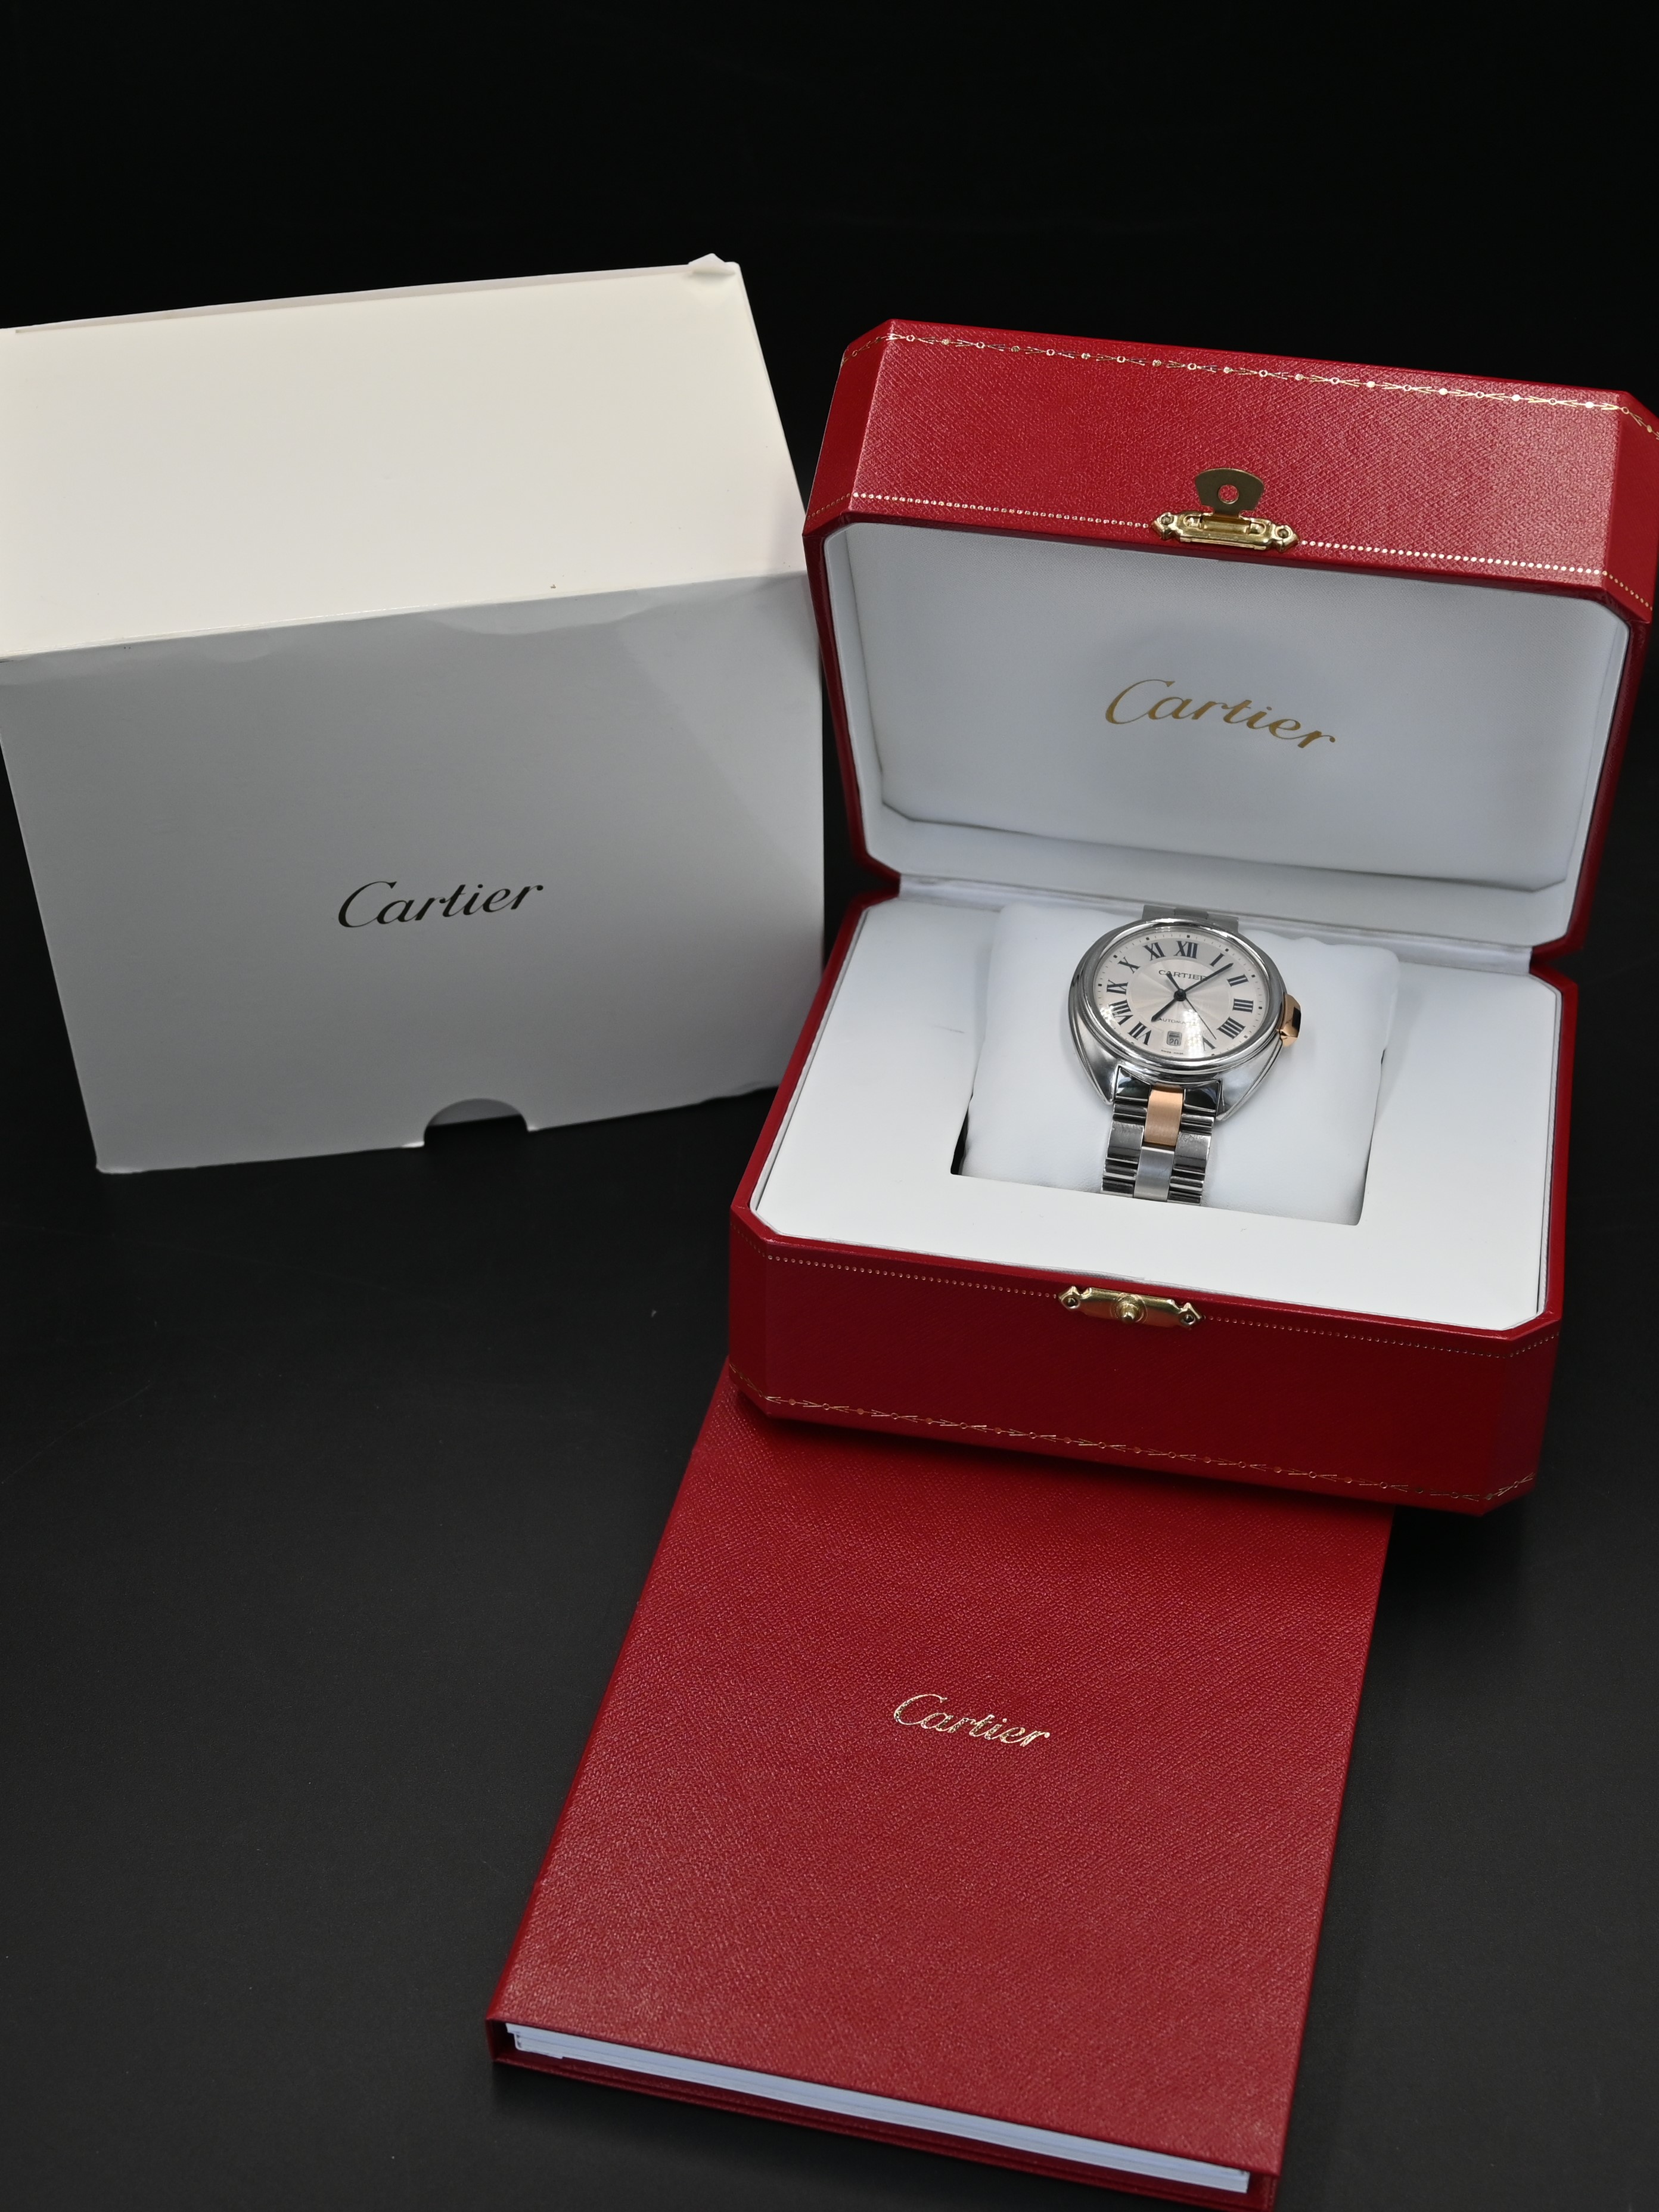 Cartier Cle de Cartier watch with 1847 MC movement with certificate of guarantee, user guide, - Image 2 of 5